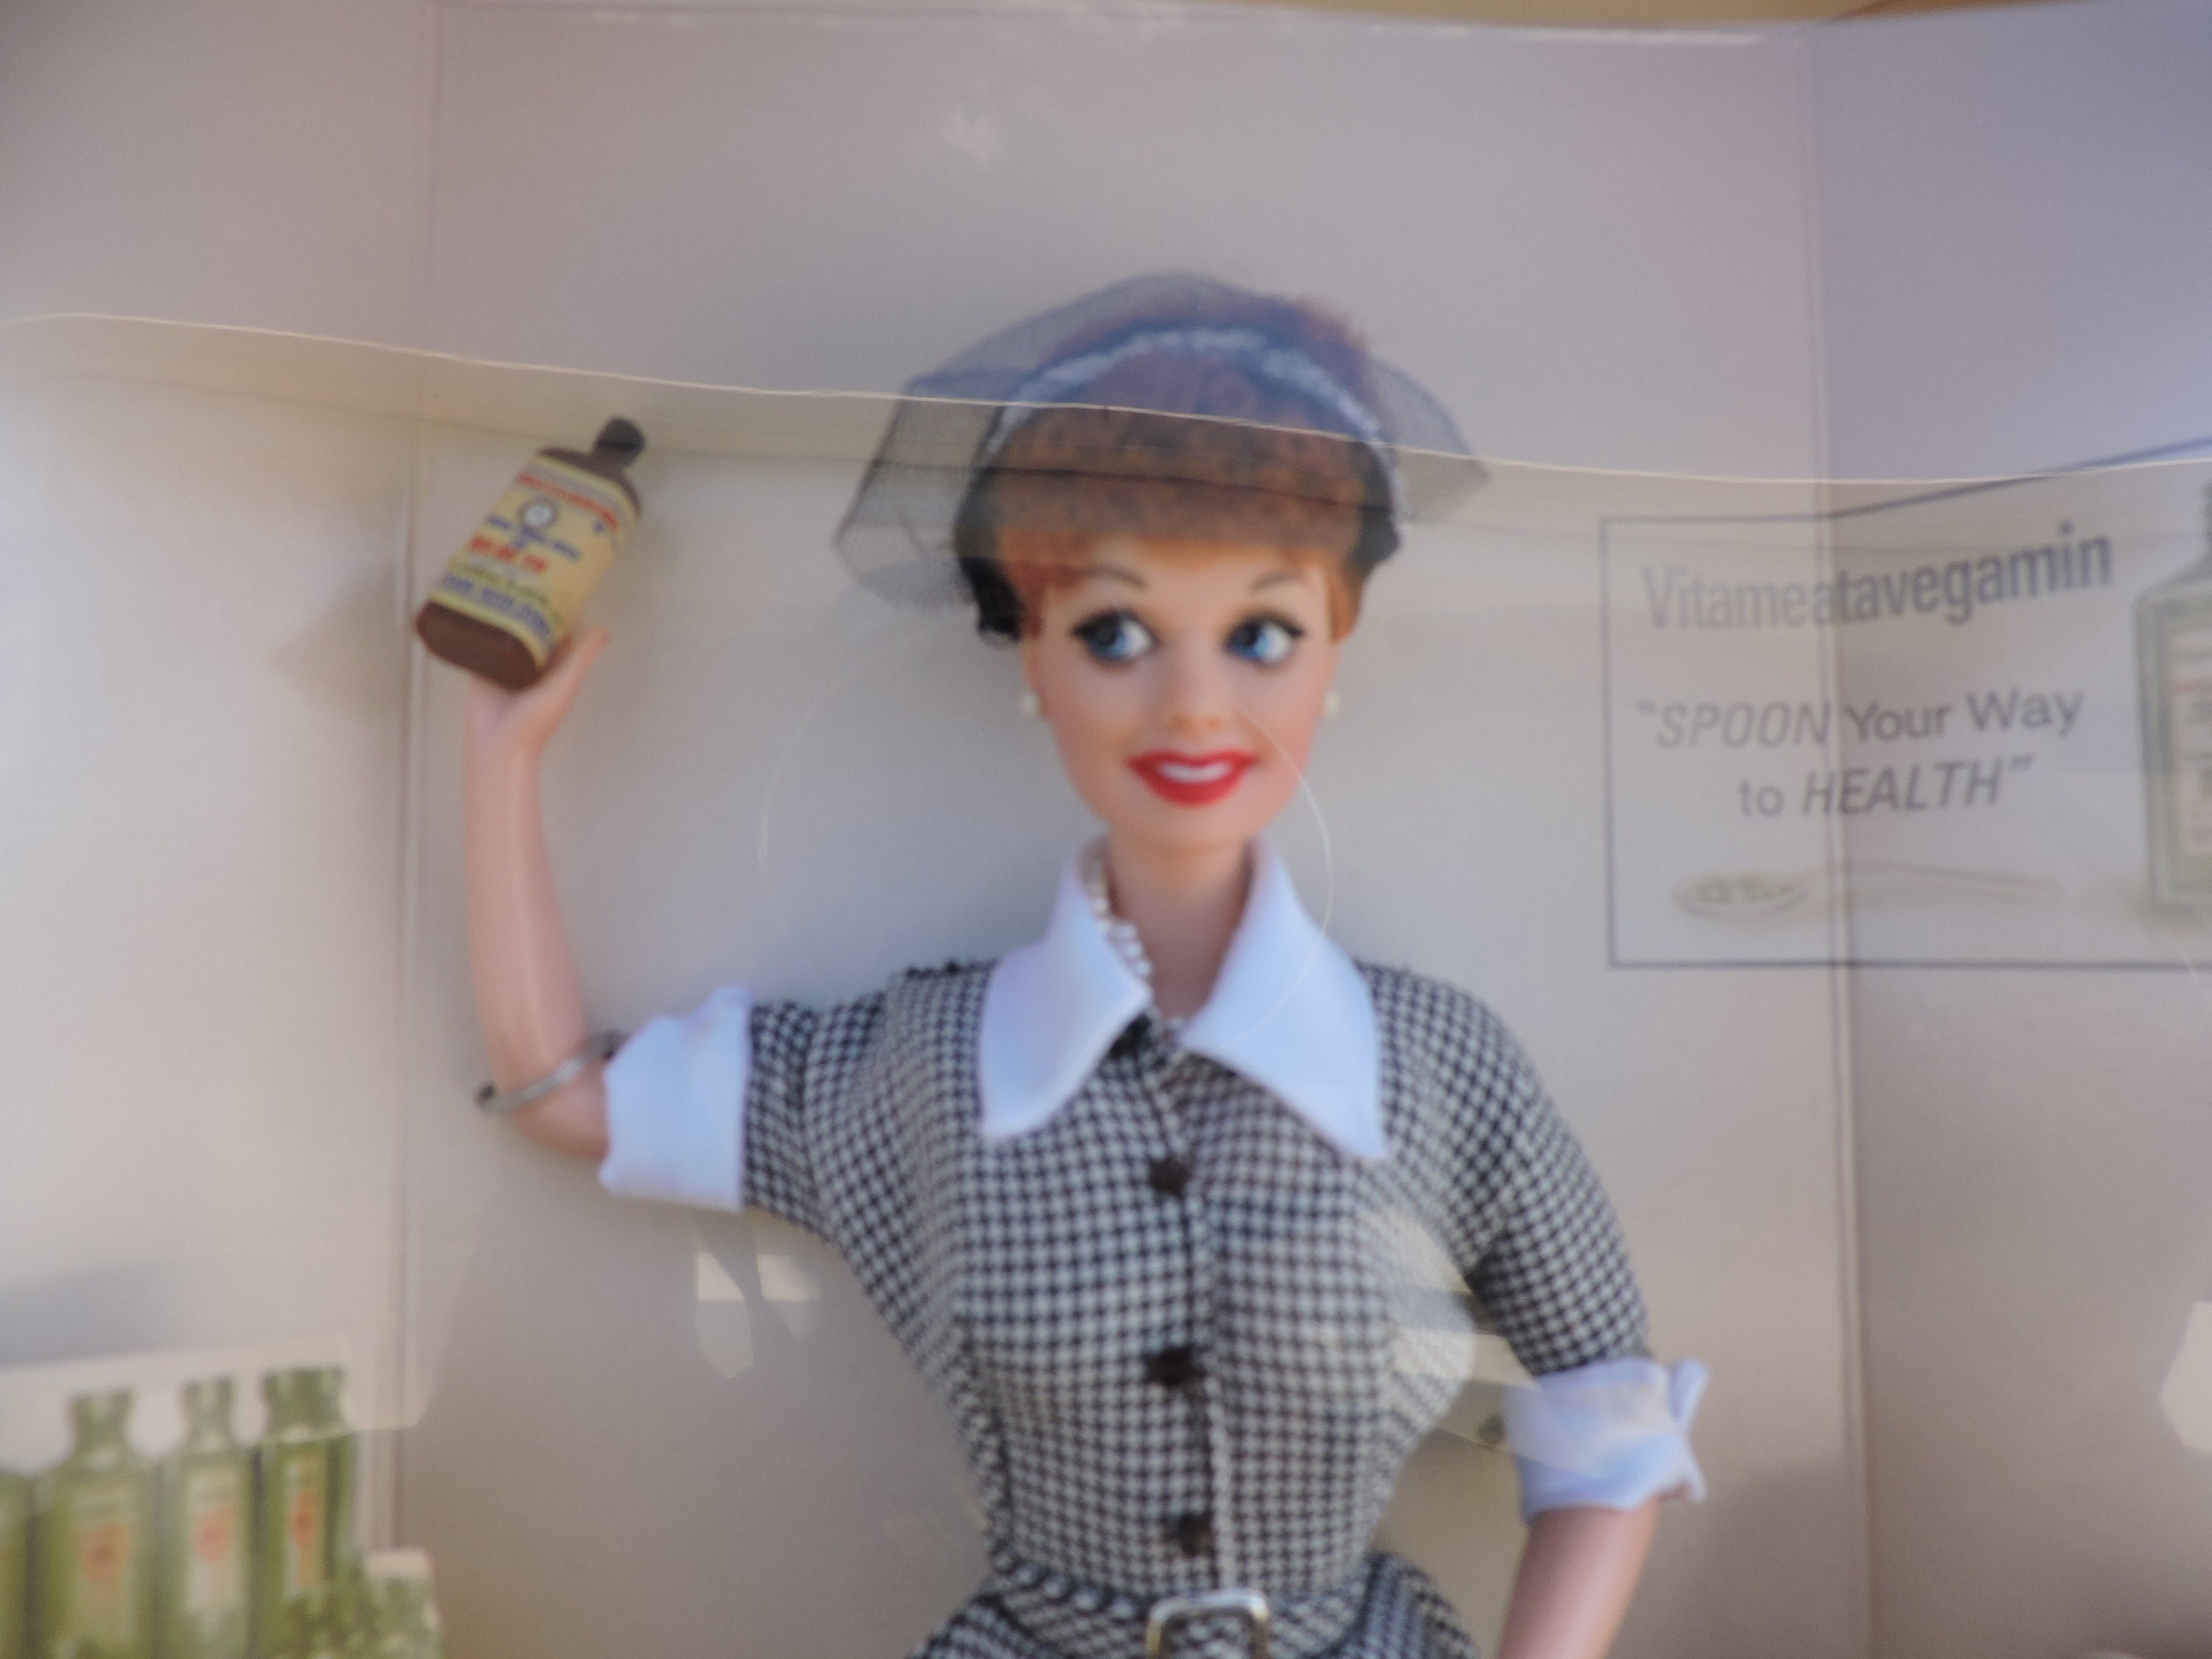 I Love Lucy Lucy does a Commercial 1997 Barbie Doll for sale online